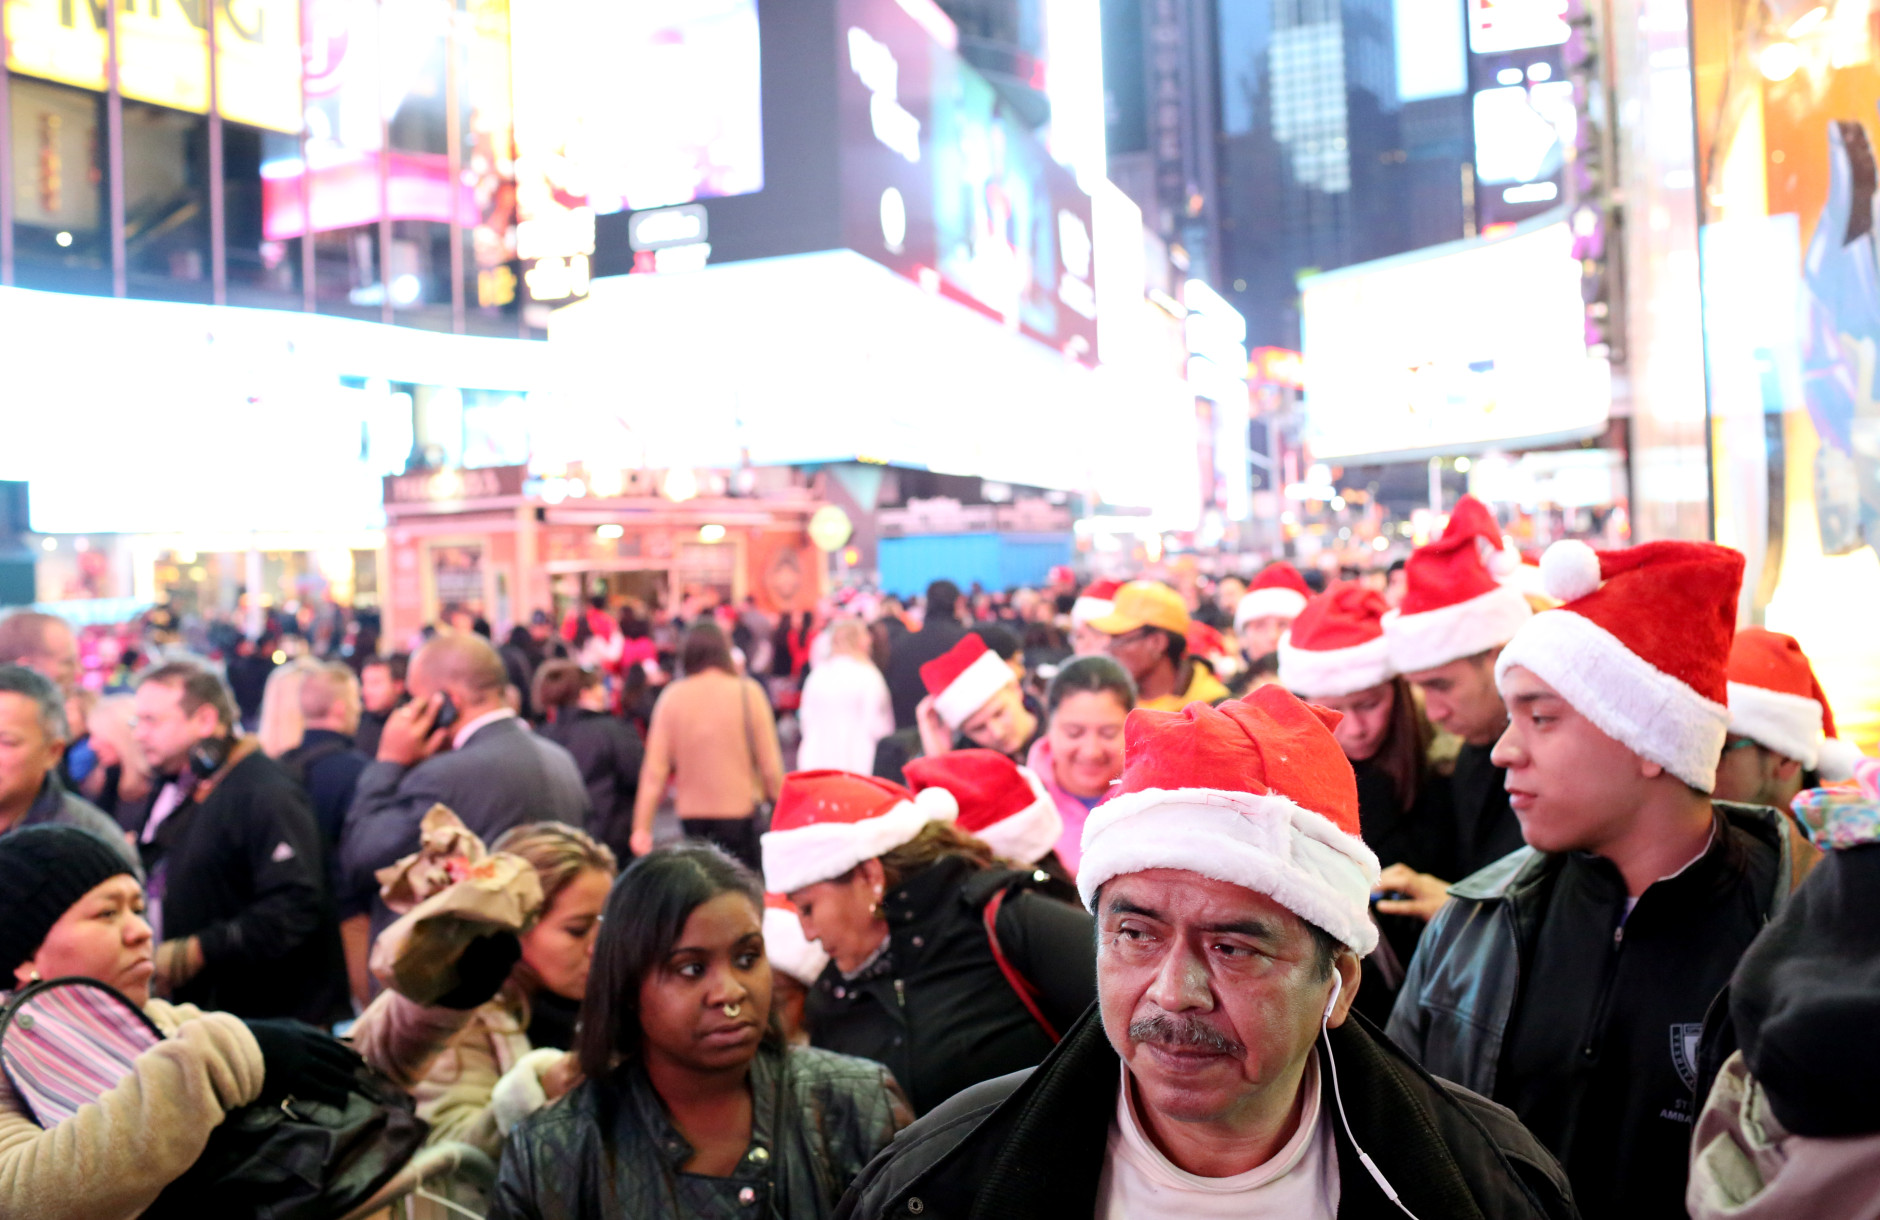 NEW YORK - NOVEMBER 26: Customers wait in line to enter Toys R Us in Times Square on Thanksgiving evening for early Black Friday sales on November 26, 2015 in New York City. Security has been heightened in Times Square and around the city as thousands of shoppers flock to stores for sales on the kickoff to the Christmas shopping season. (Photo by Yana Paskova/Getty Images)